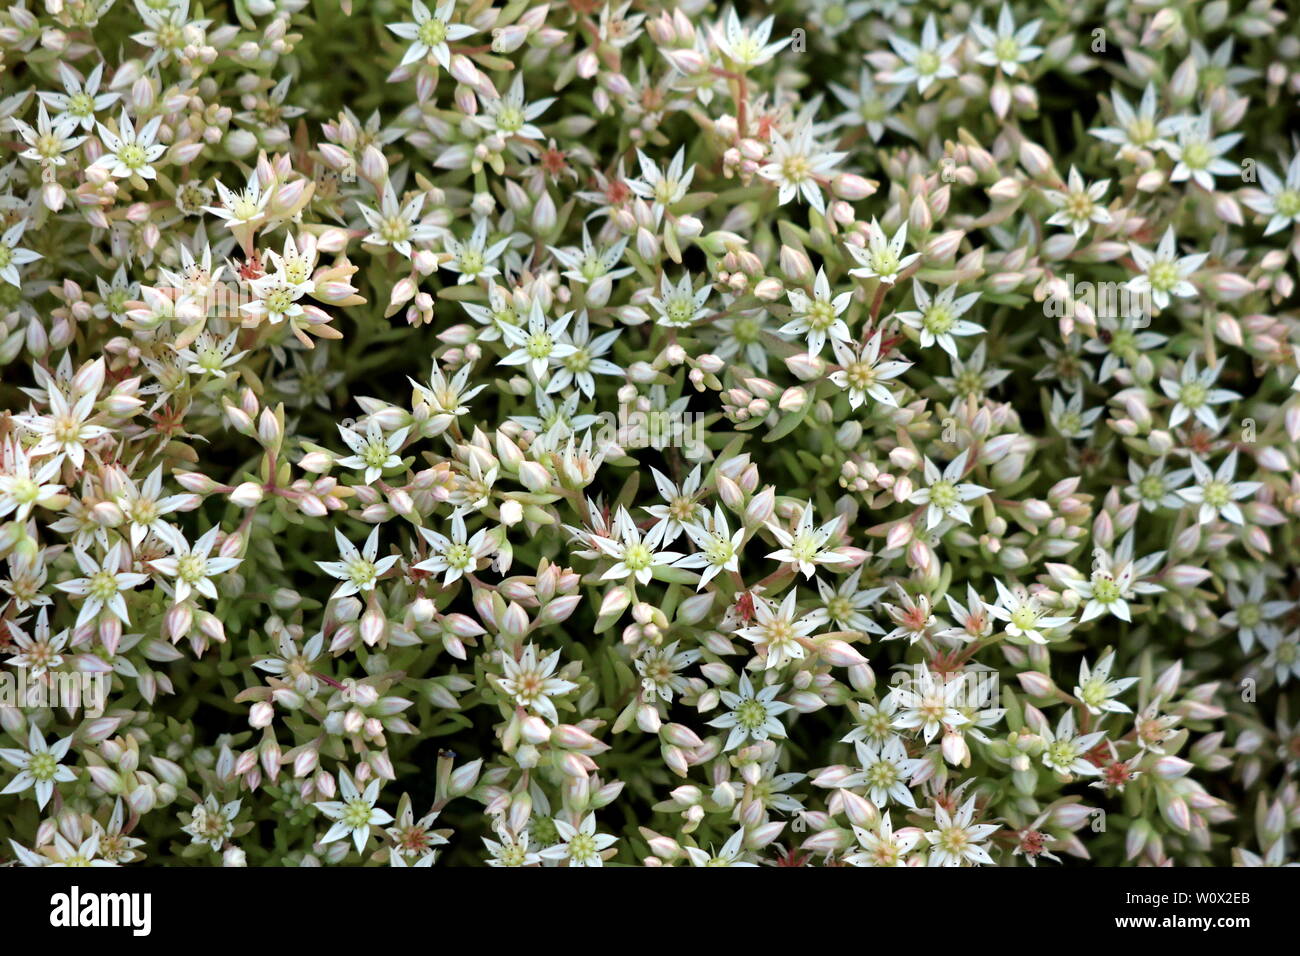 Densely planted Sedum or Stonecrop hardy succulent ground cover perennial plants background texture with thick succulent leaves and fleshy stems Stock Photo